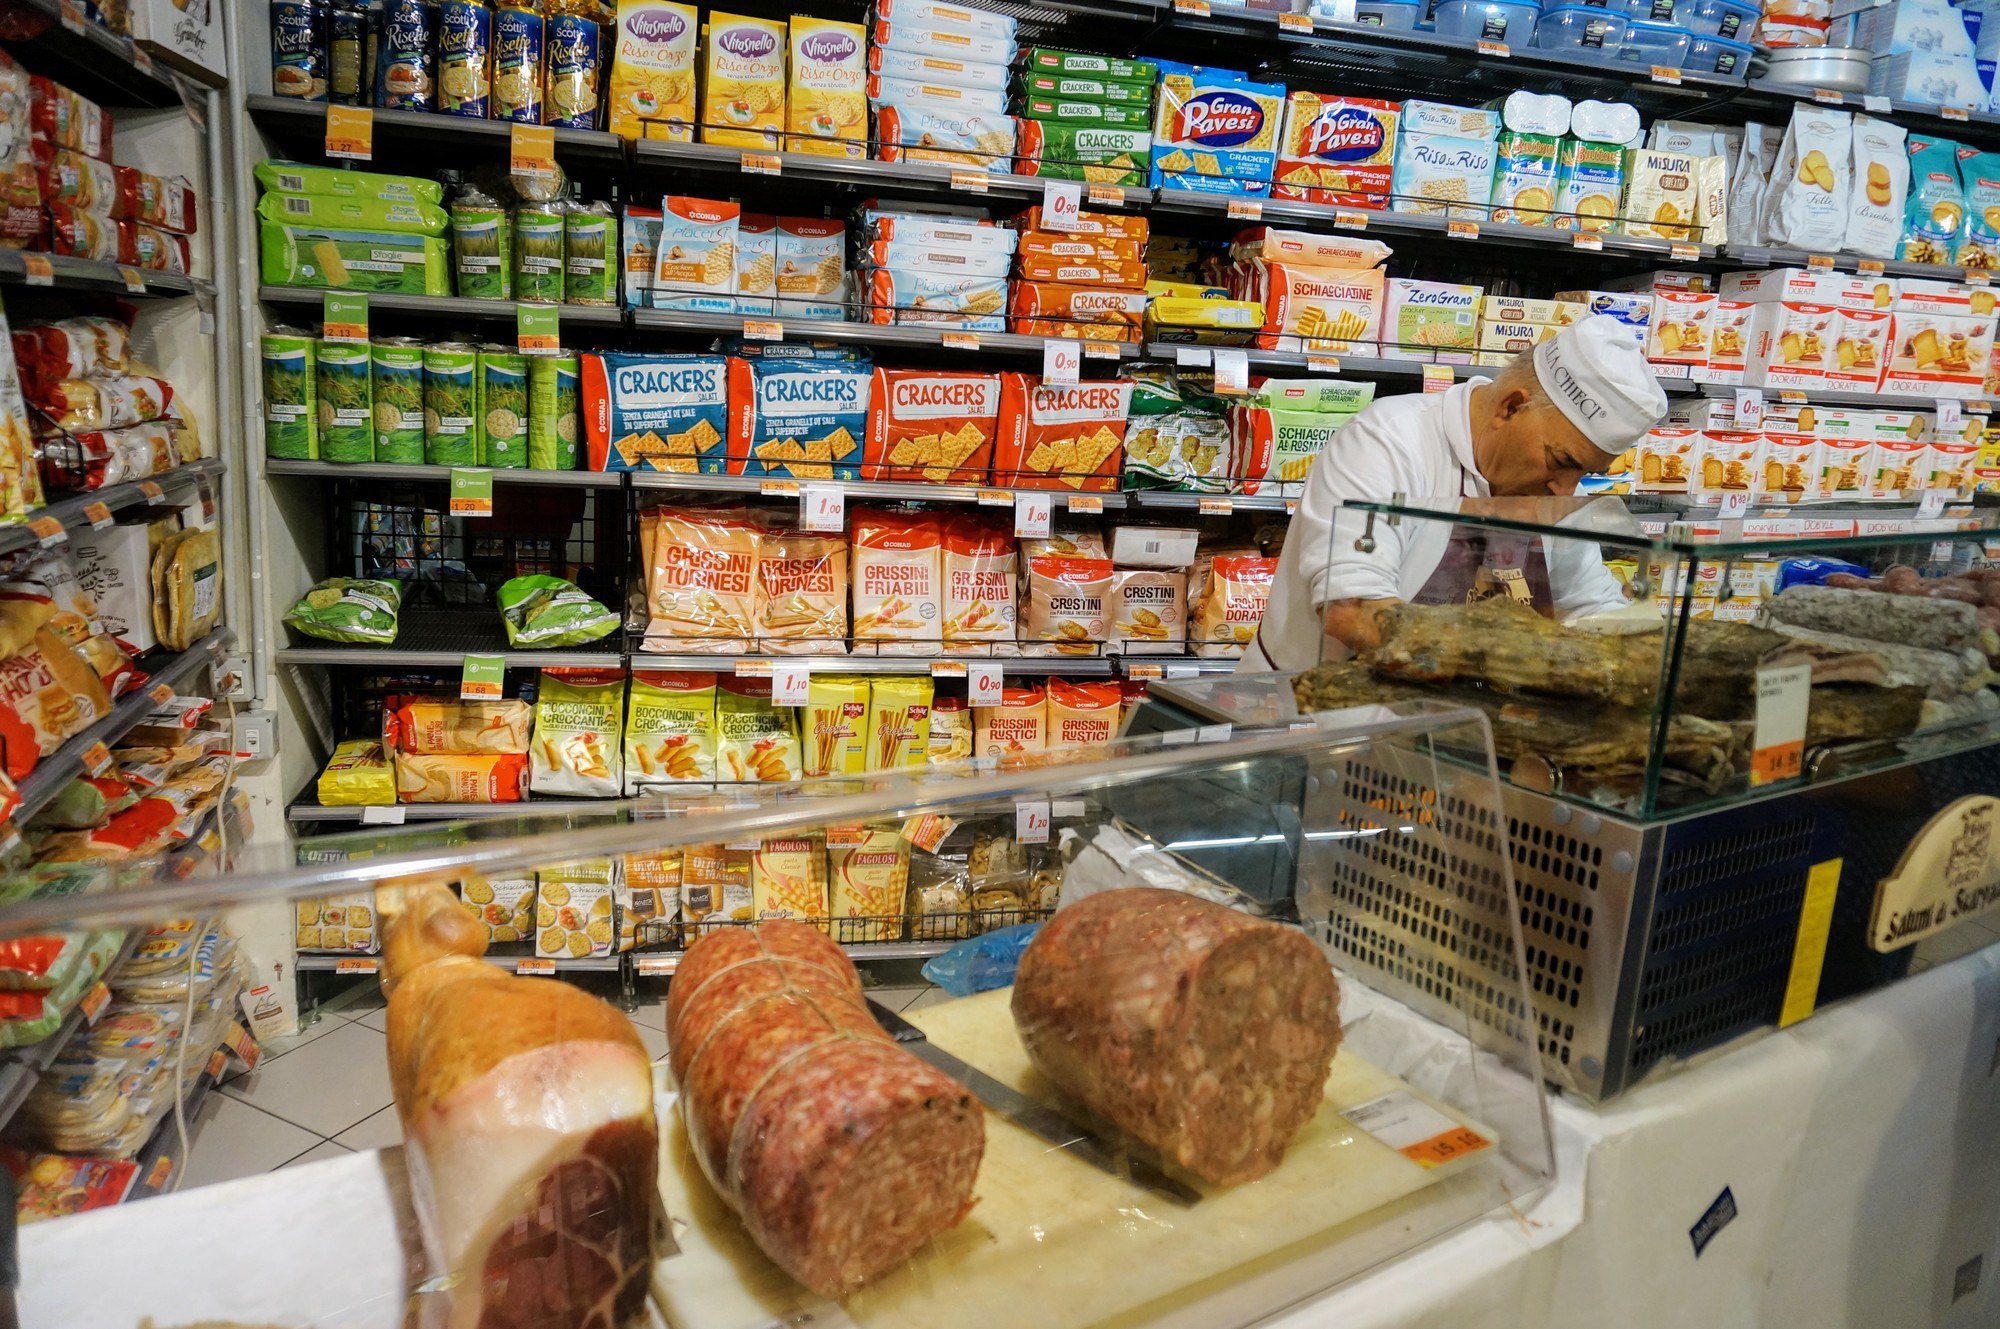 Top 15 Food Souvenirs to Buy at a Supermarket in Italy